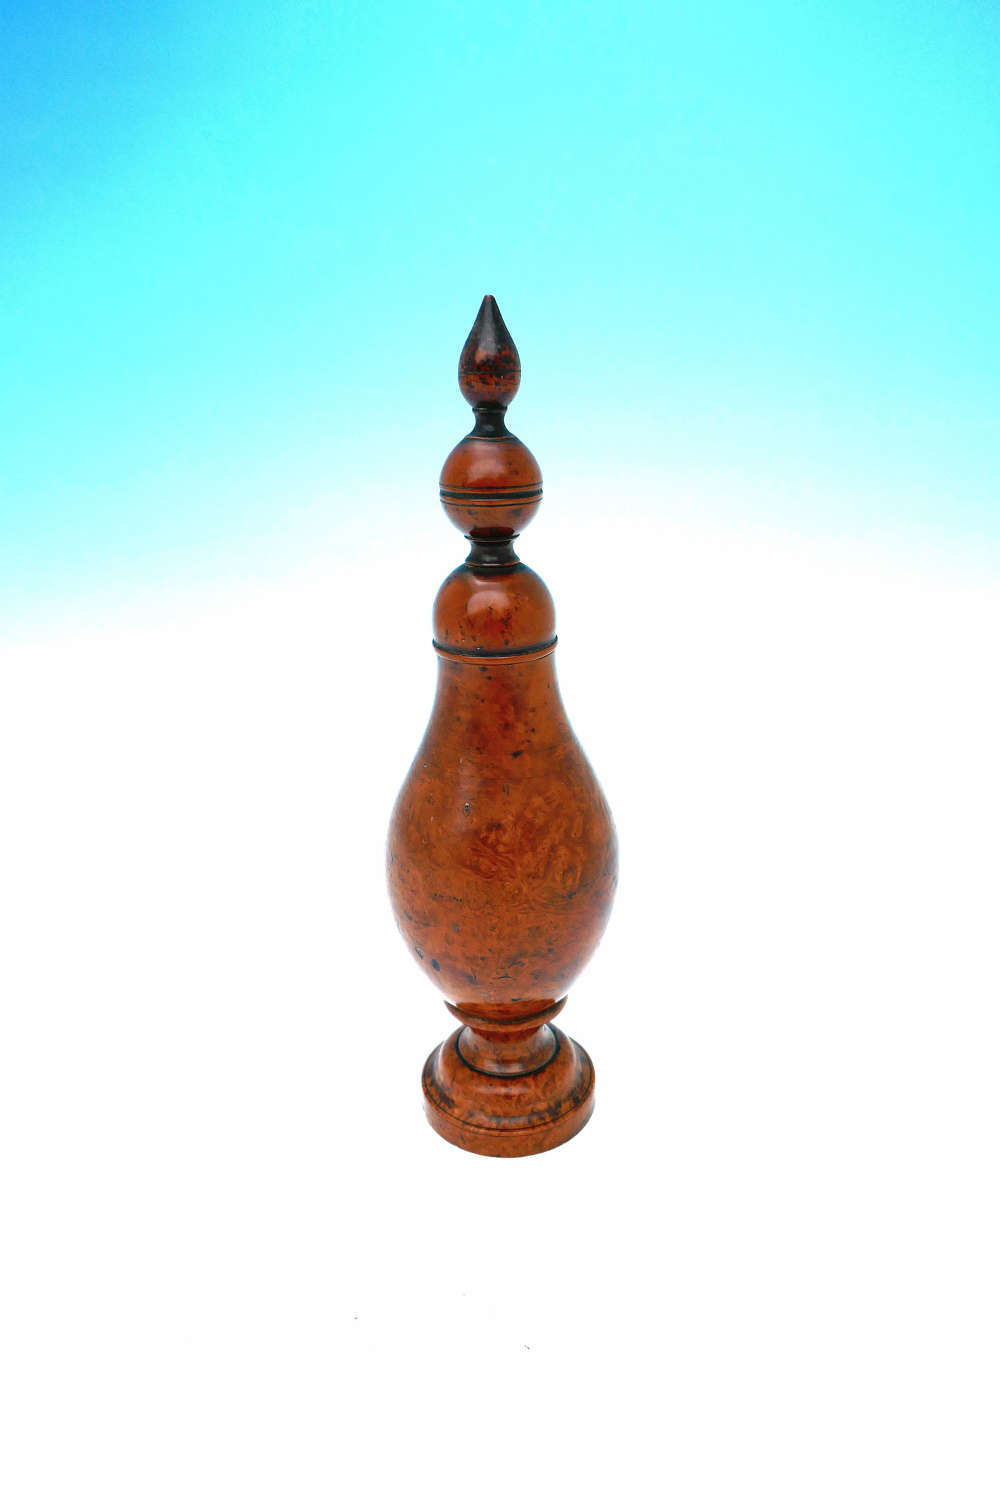 An Early 19thc Treen Burr Glove Powder Flask Of Pleasing Shape. French